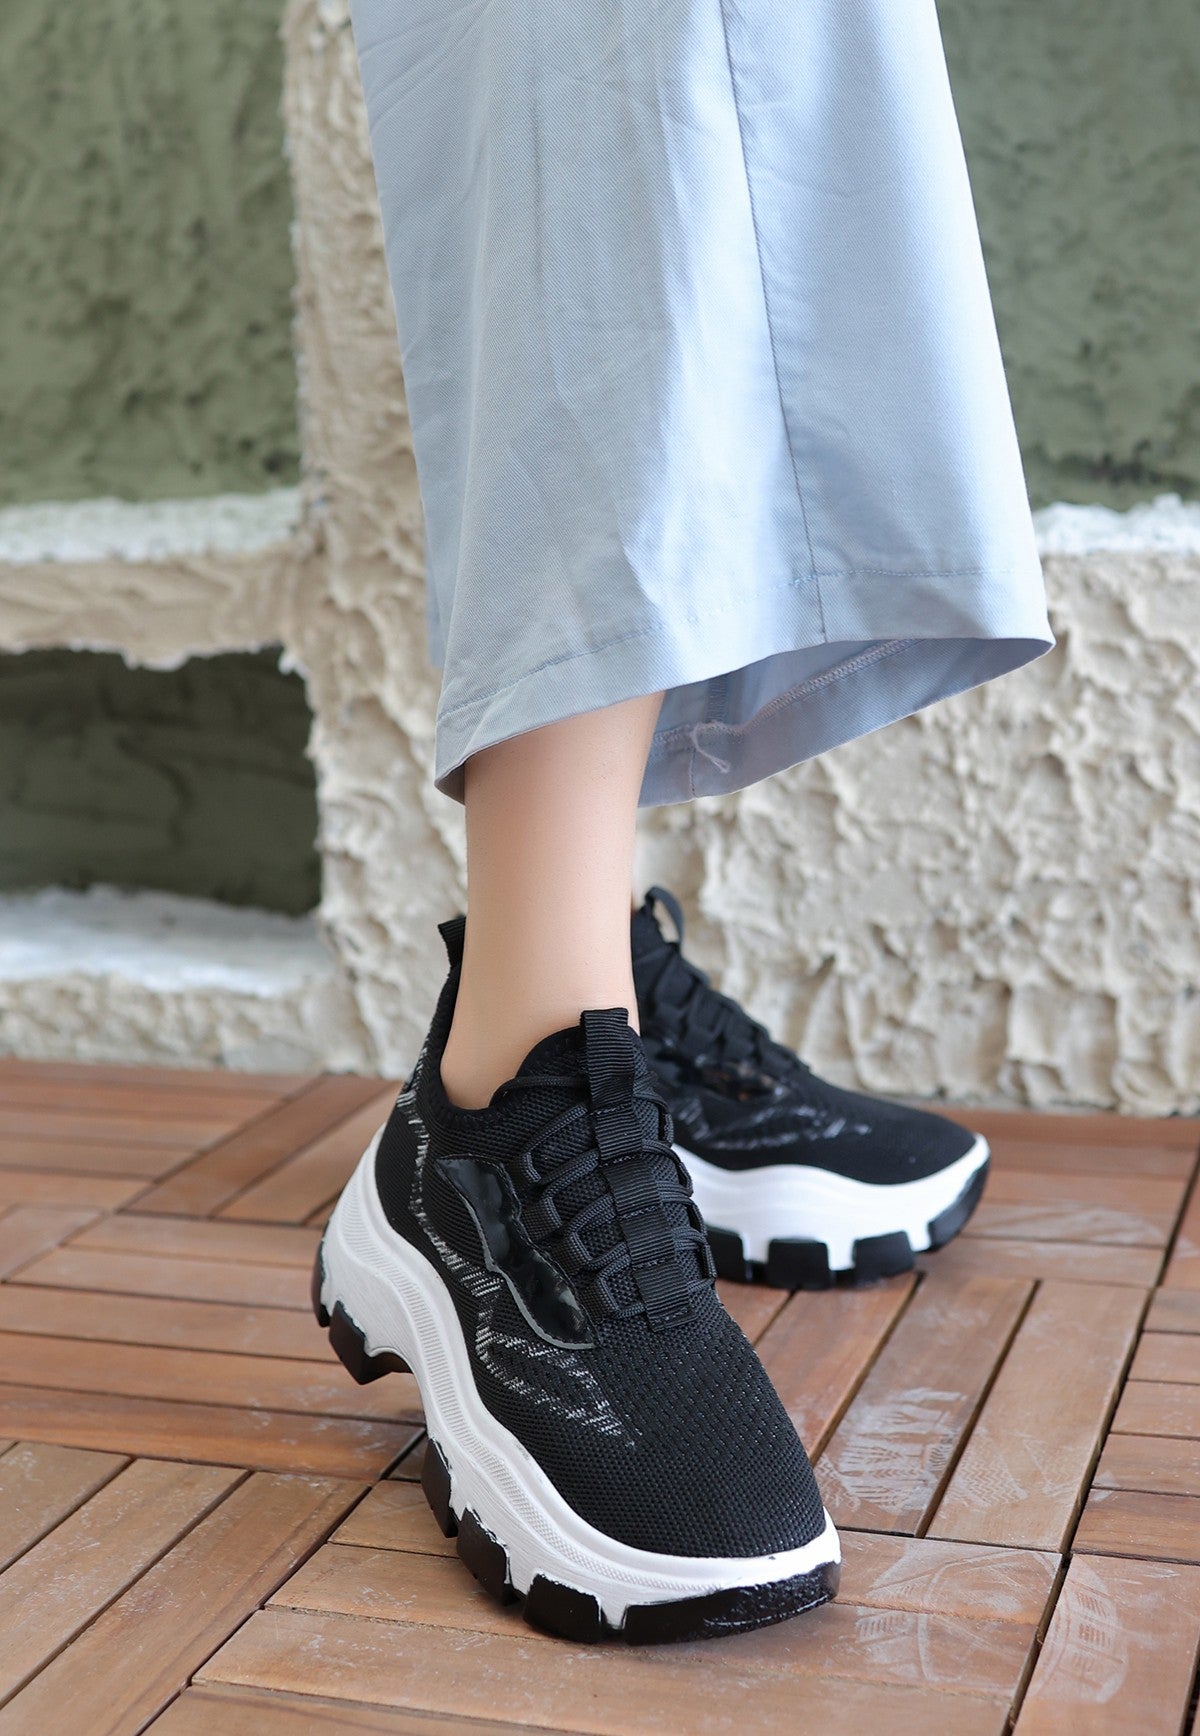 Women's Black Knitwear Lace-Up Sports Shoes - STREETMODE™